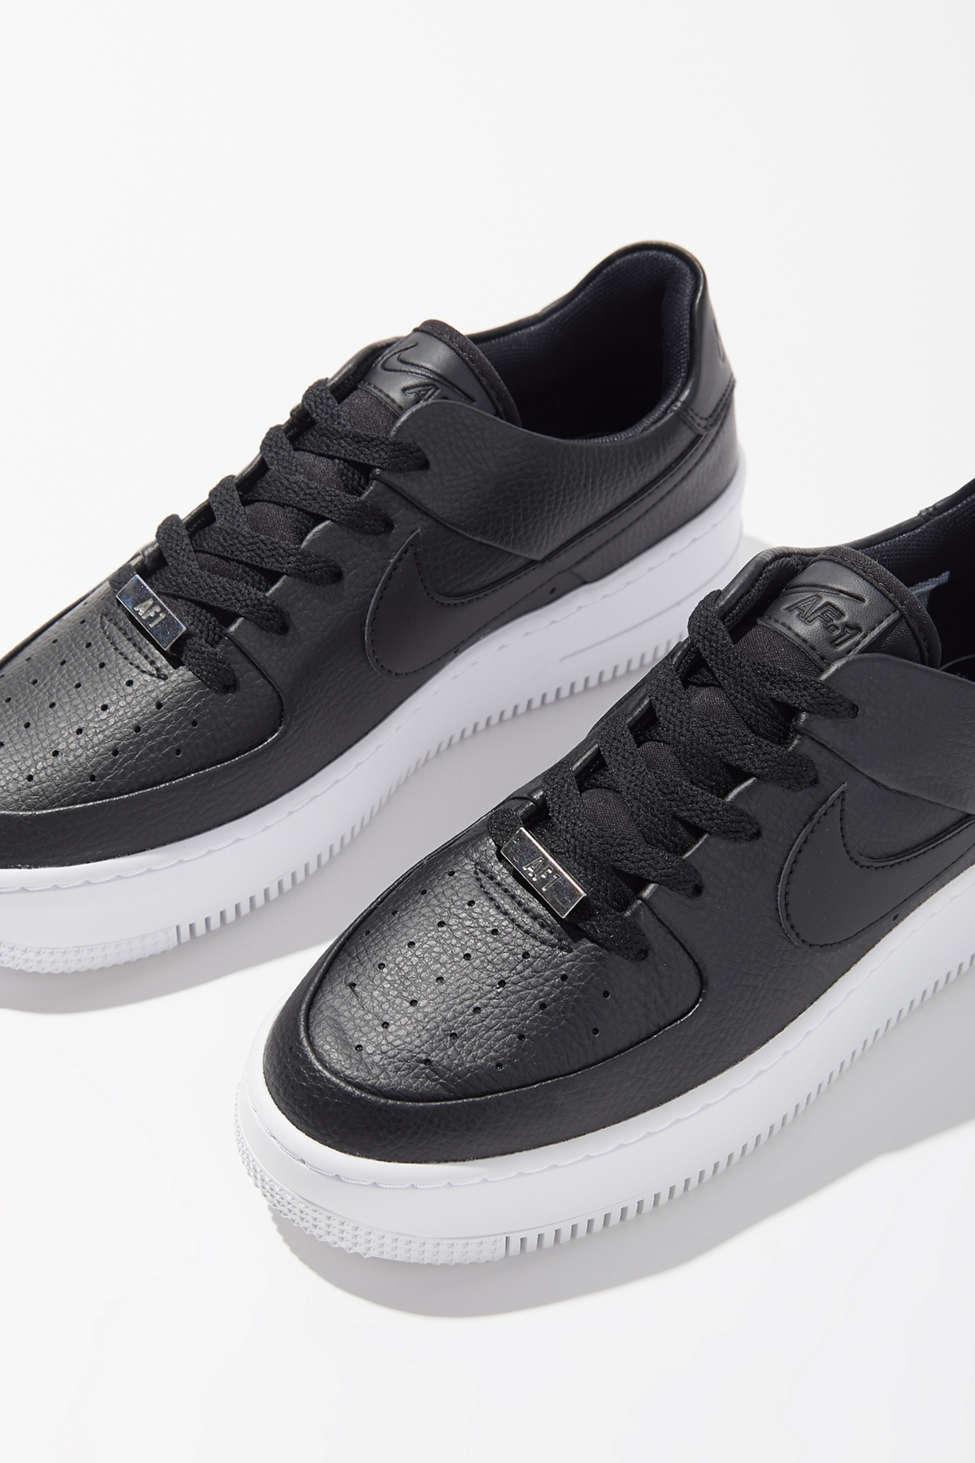 Nike Leather Air Force 1 Sage Low Basketball Shoes in Black/White (Black) |  Lyst